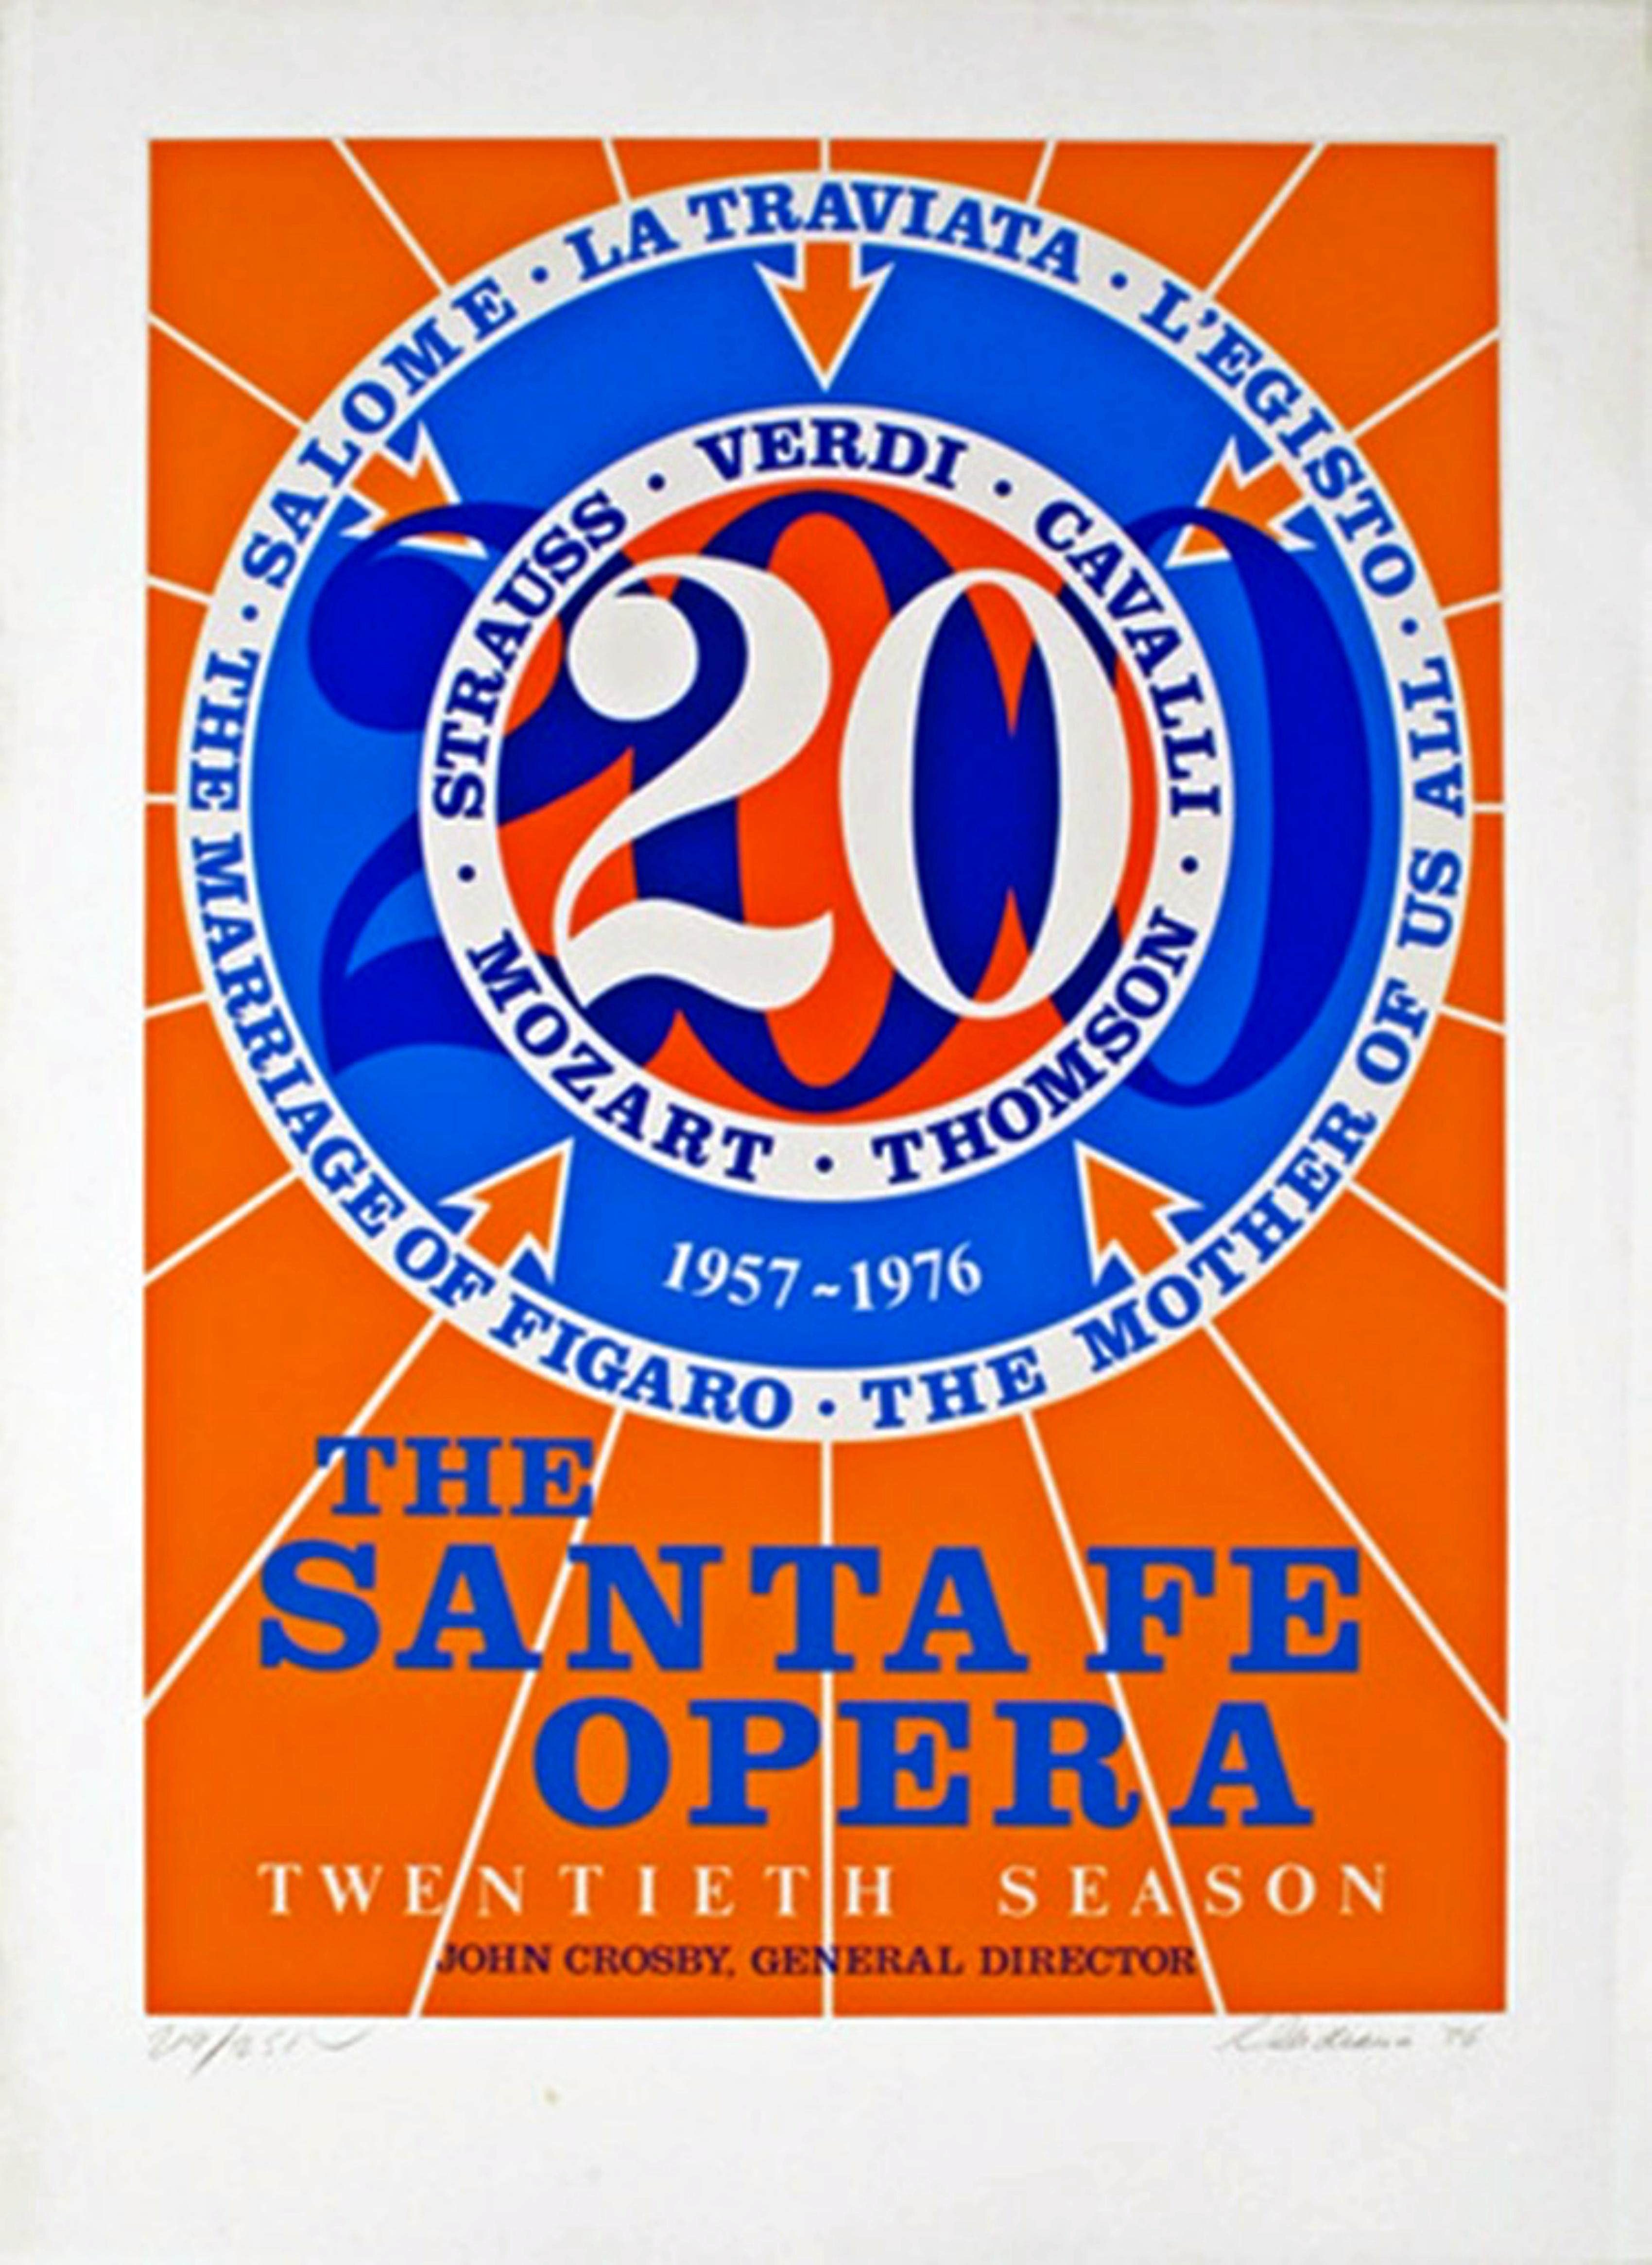 Robert Indiana Figurative Print - Santa Fe Opera (Deluxe VIP Edition; Hand Signed & Numbered AP Edition of 50)